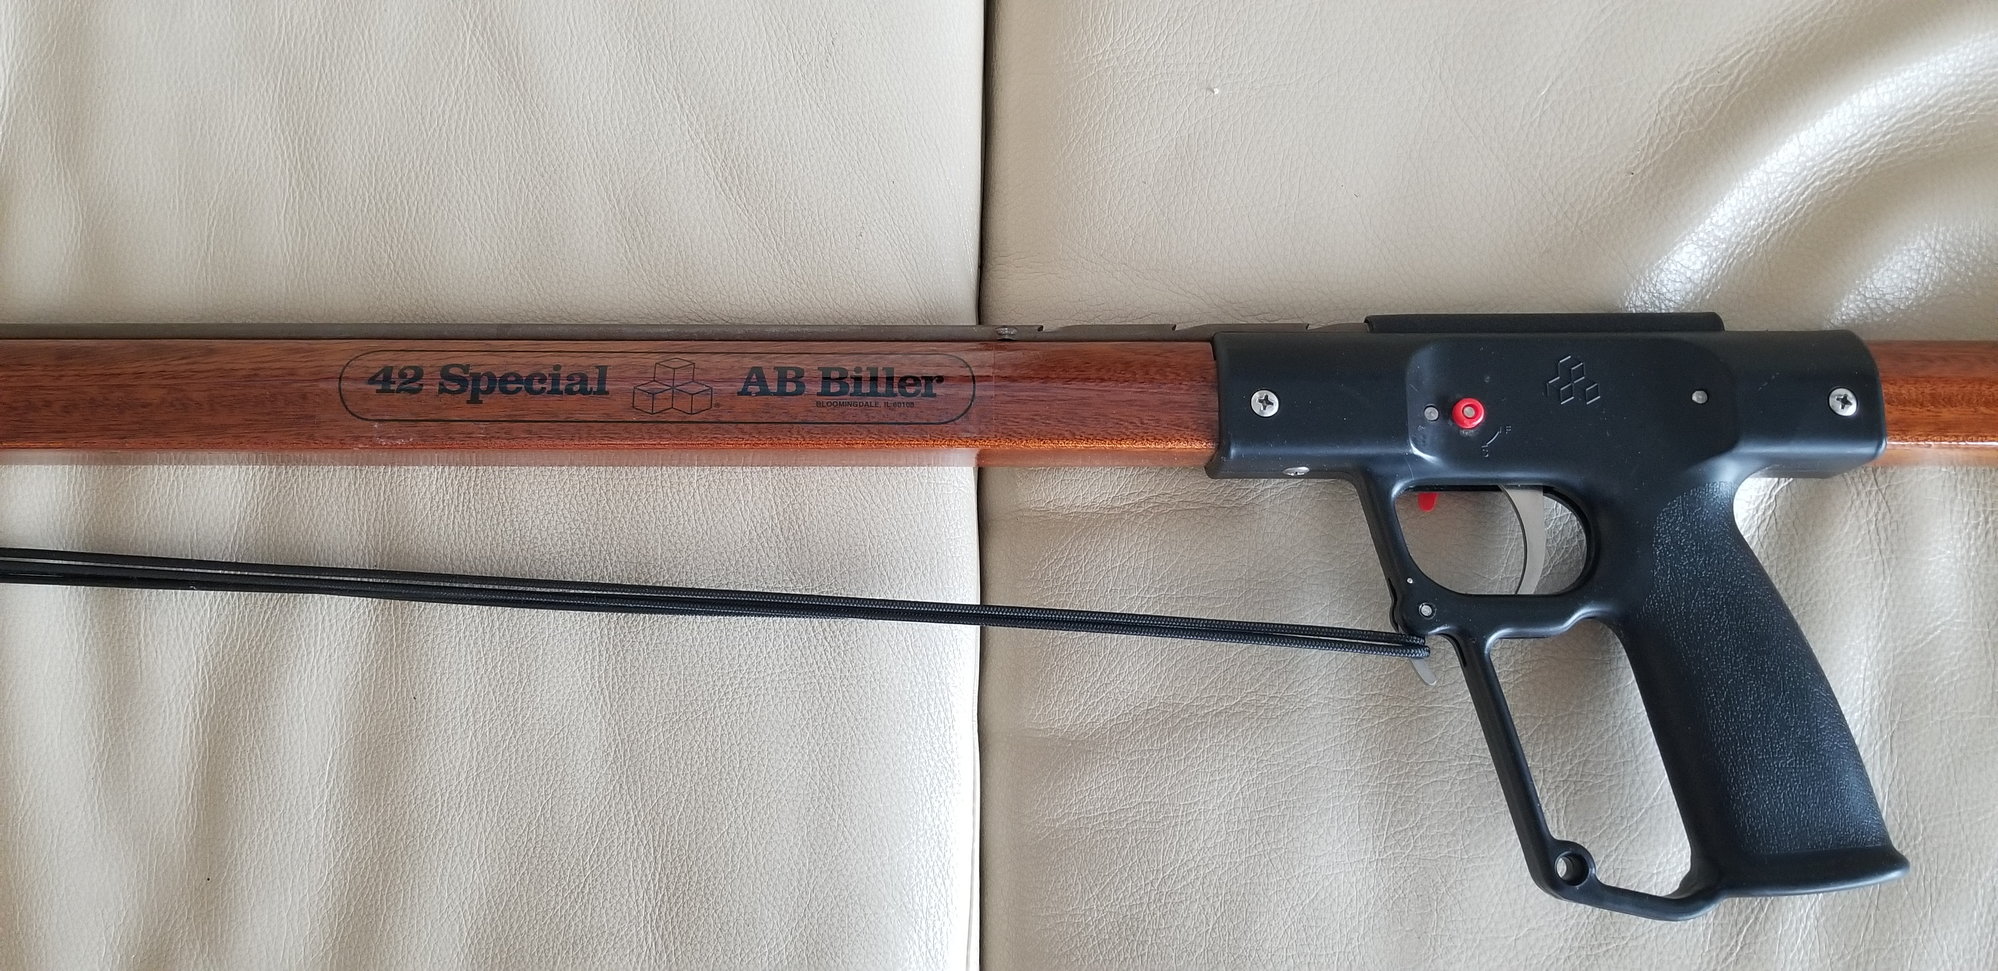 Brand new speargun ab biller 42 special - The Hull Truth - Boating and  Fishing Forum